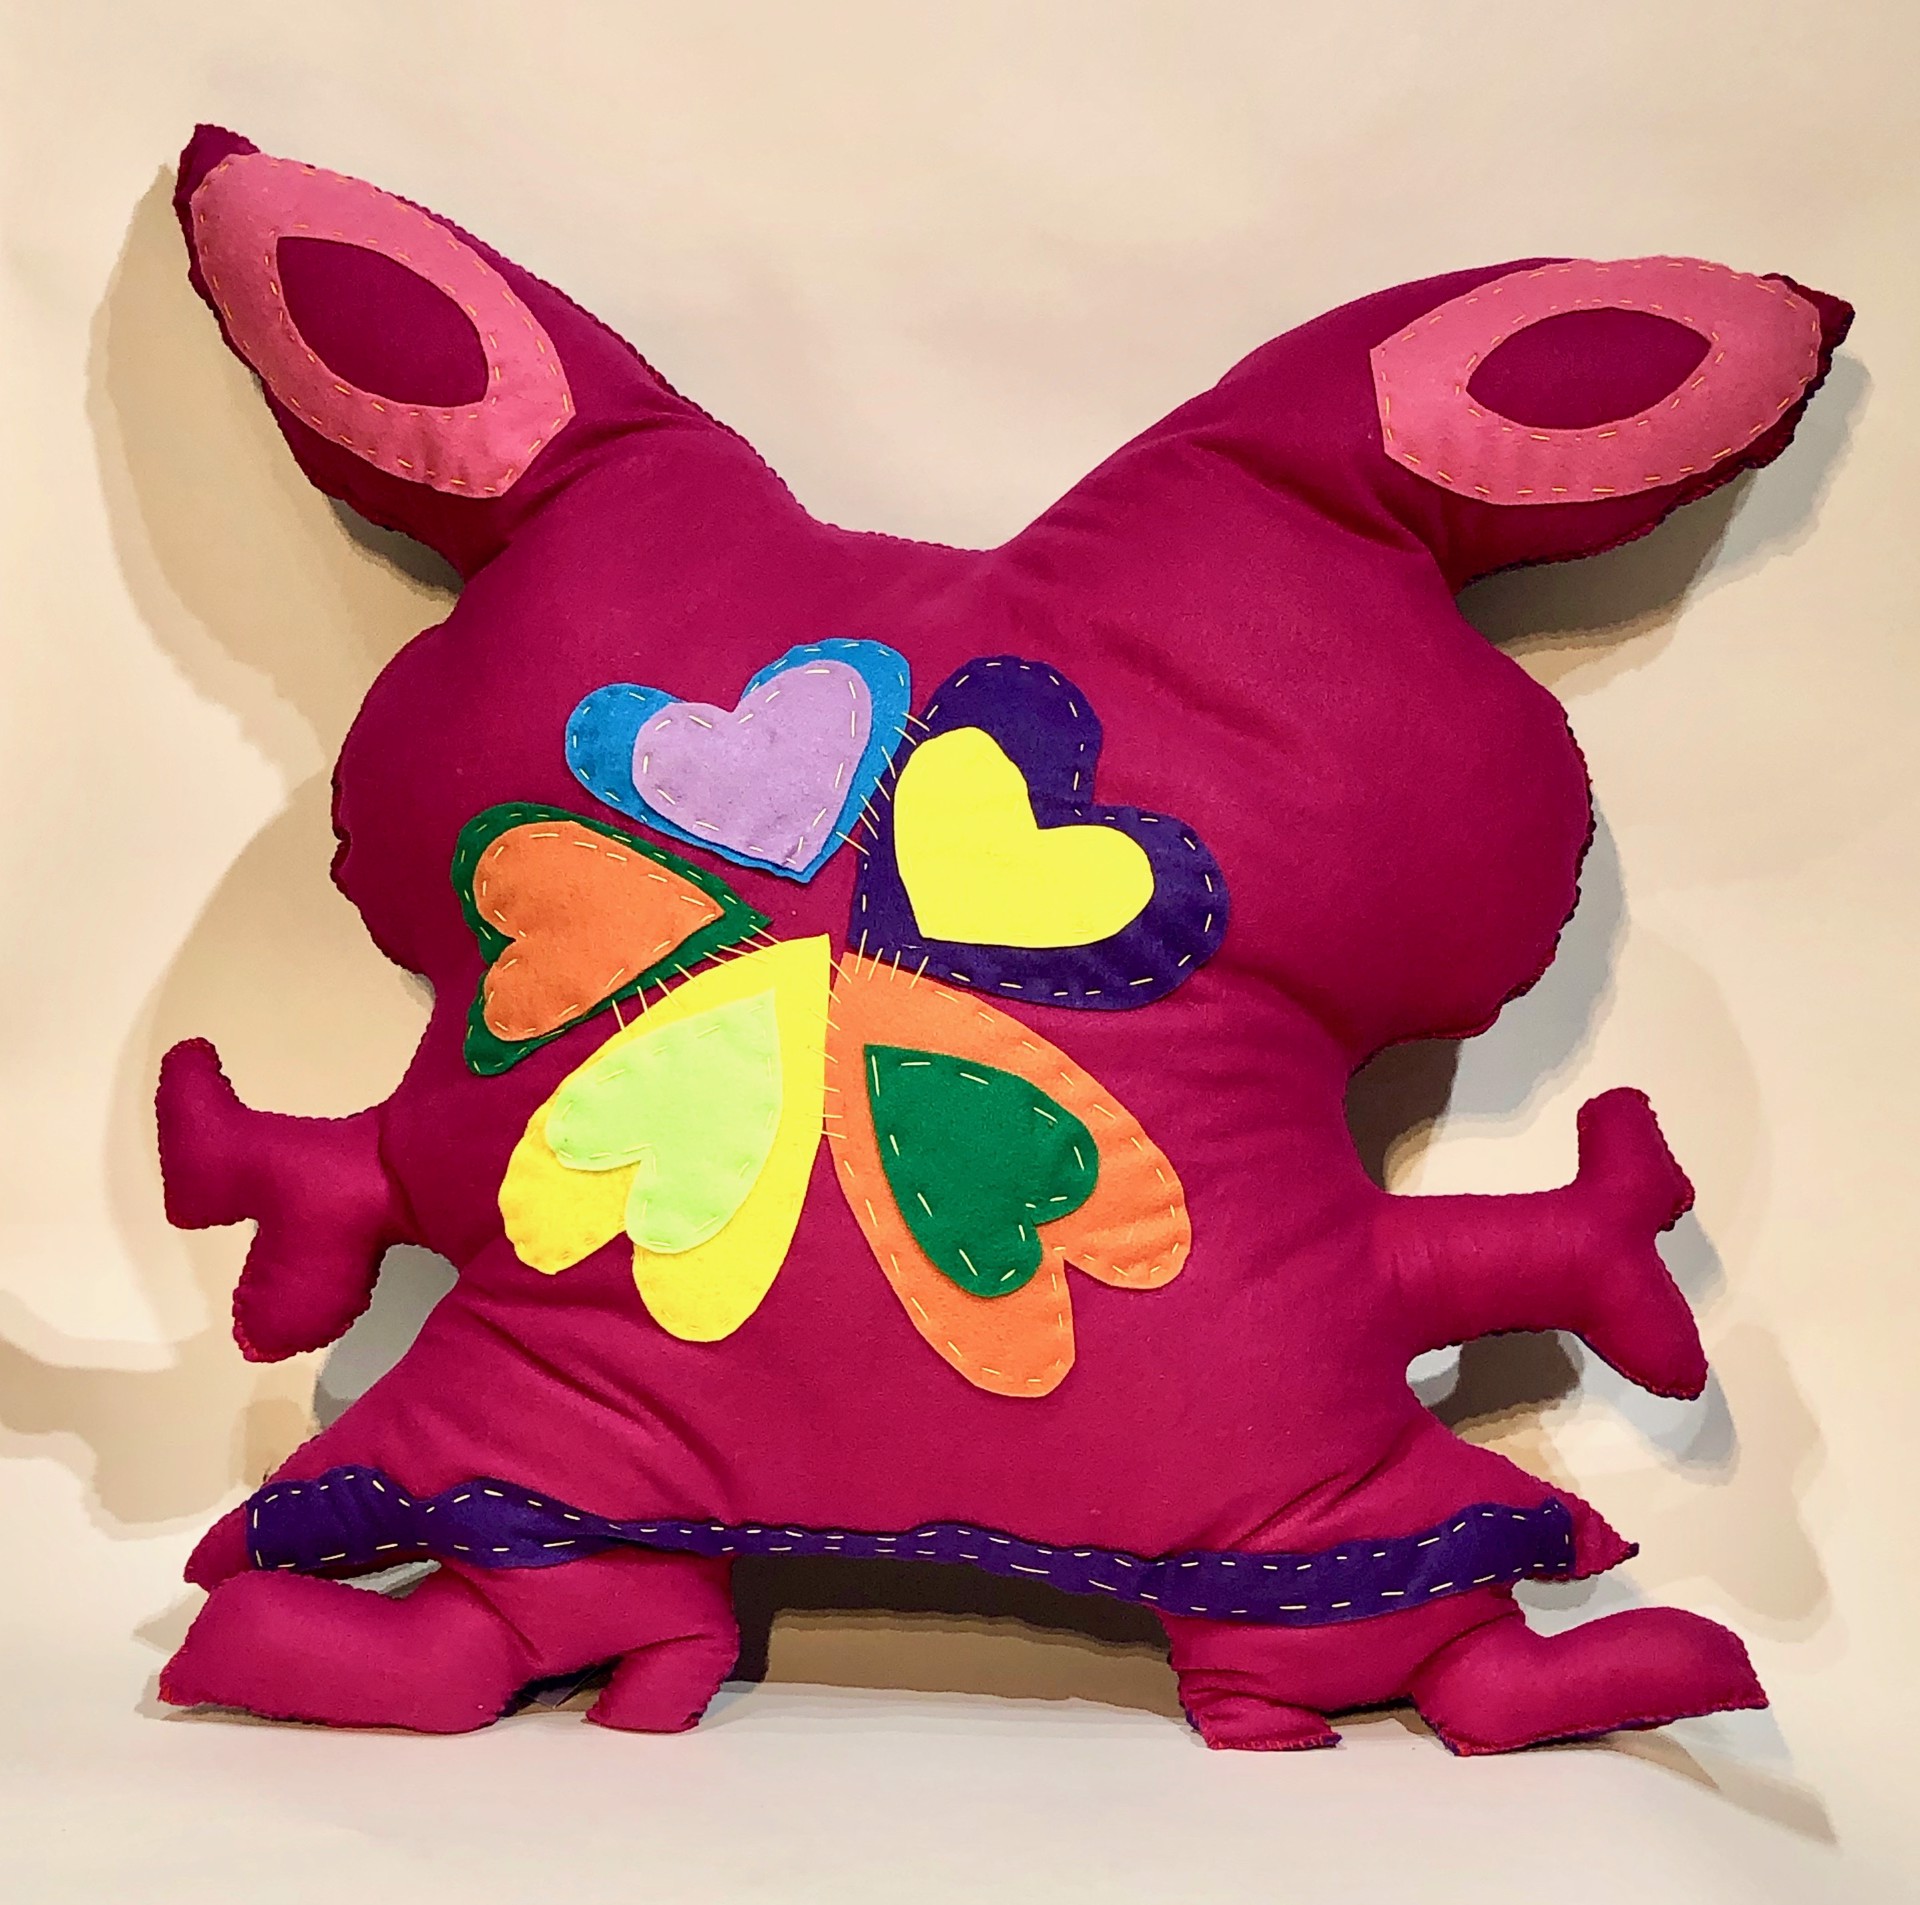 Great Big Free Range Critter Purple & Pink with Boots by Kerry Green